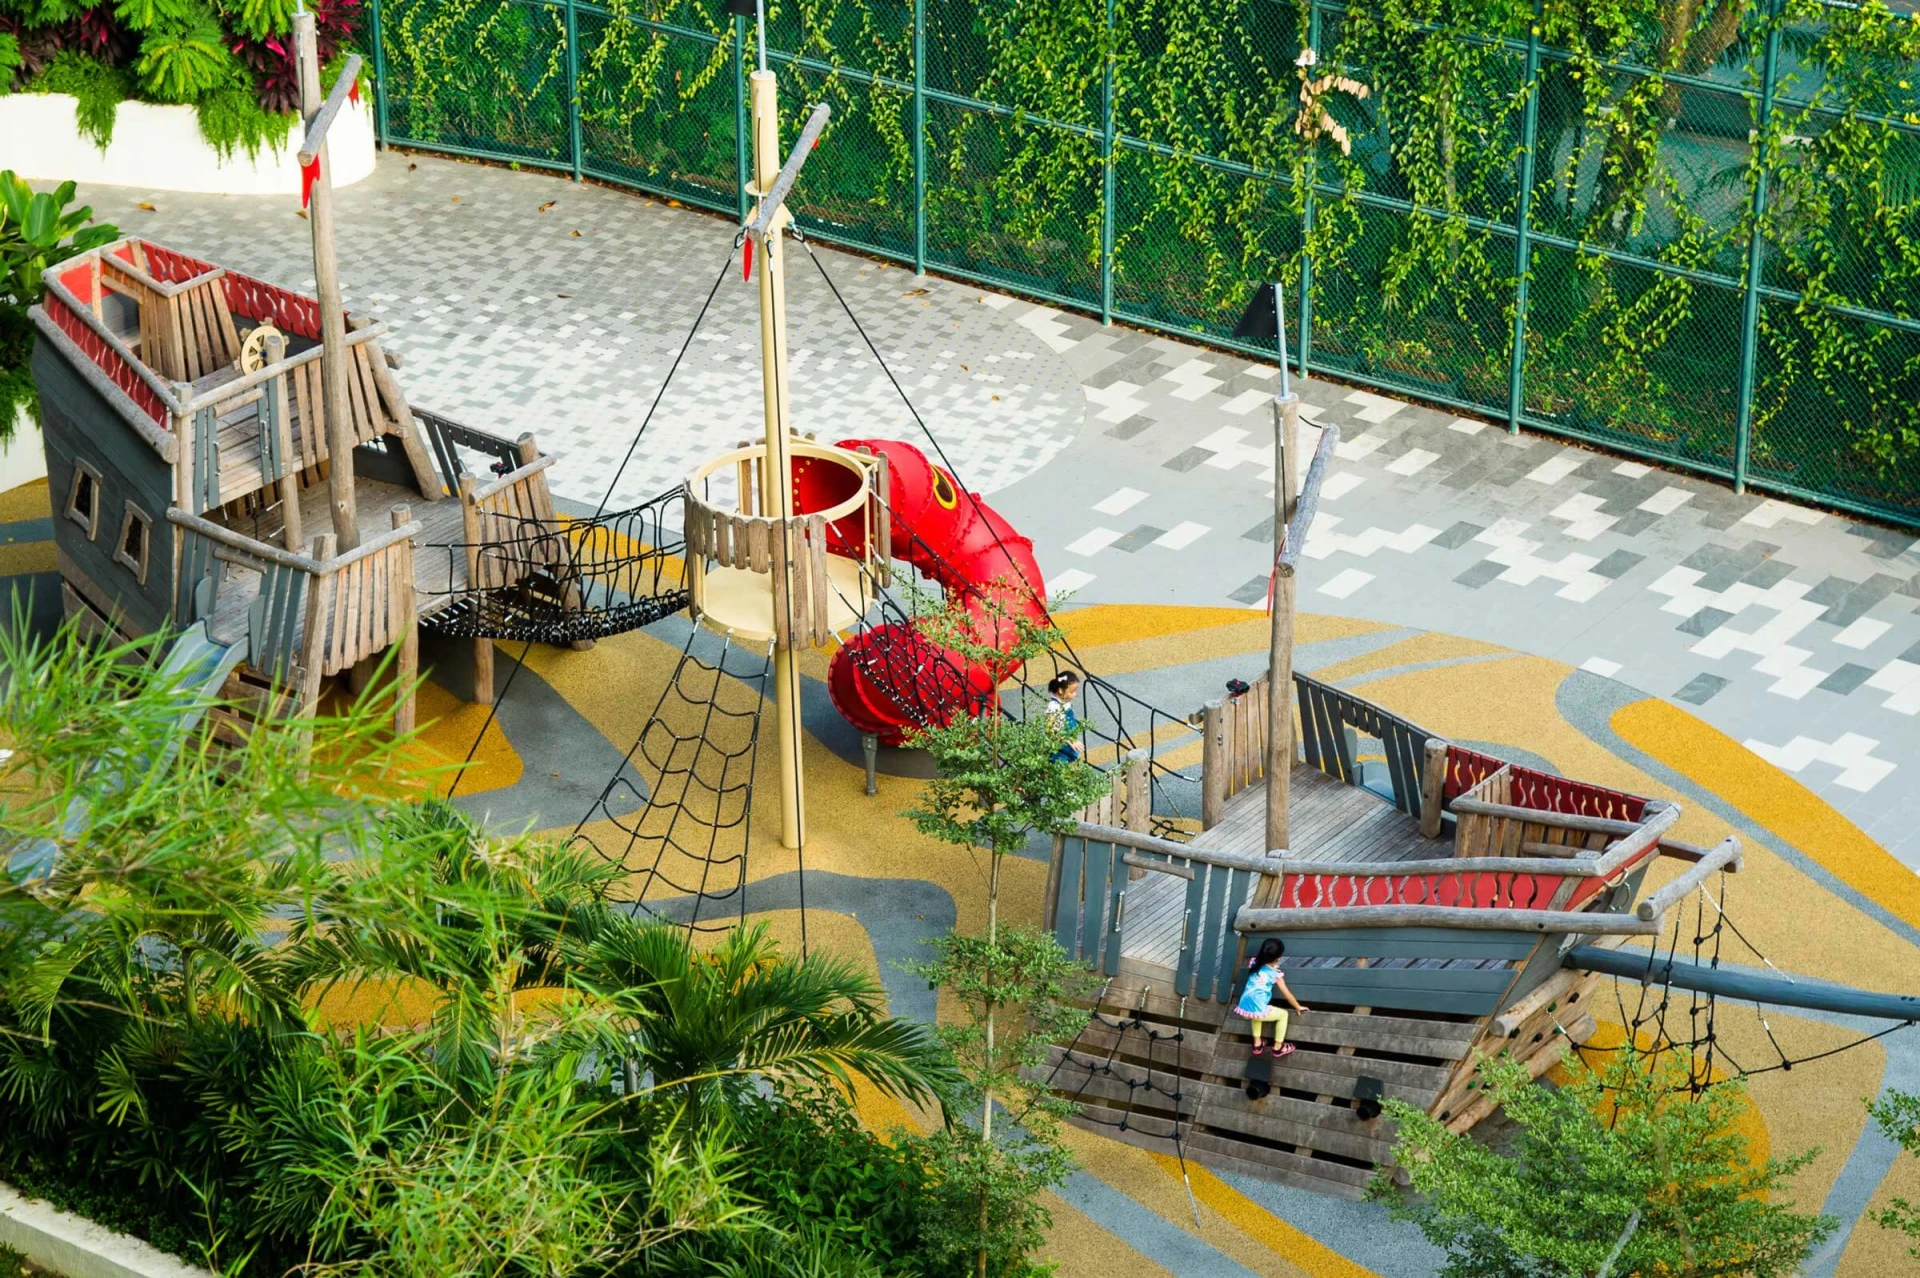 A large wooden playground ship with a climbing net and slide